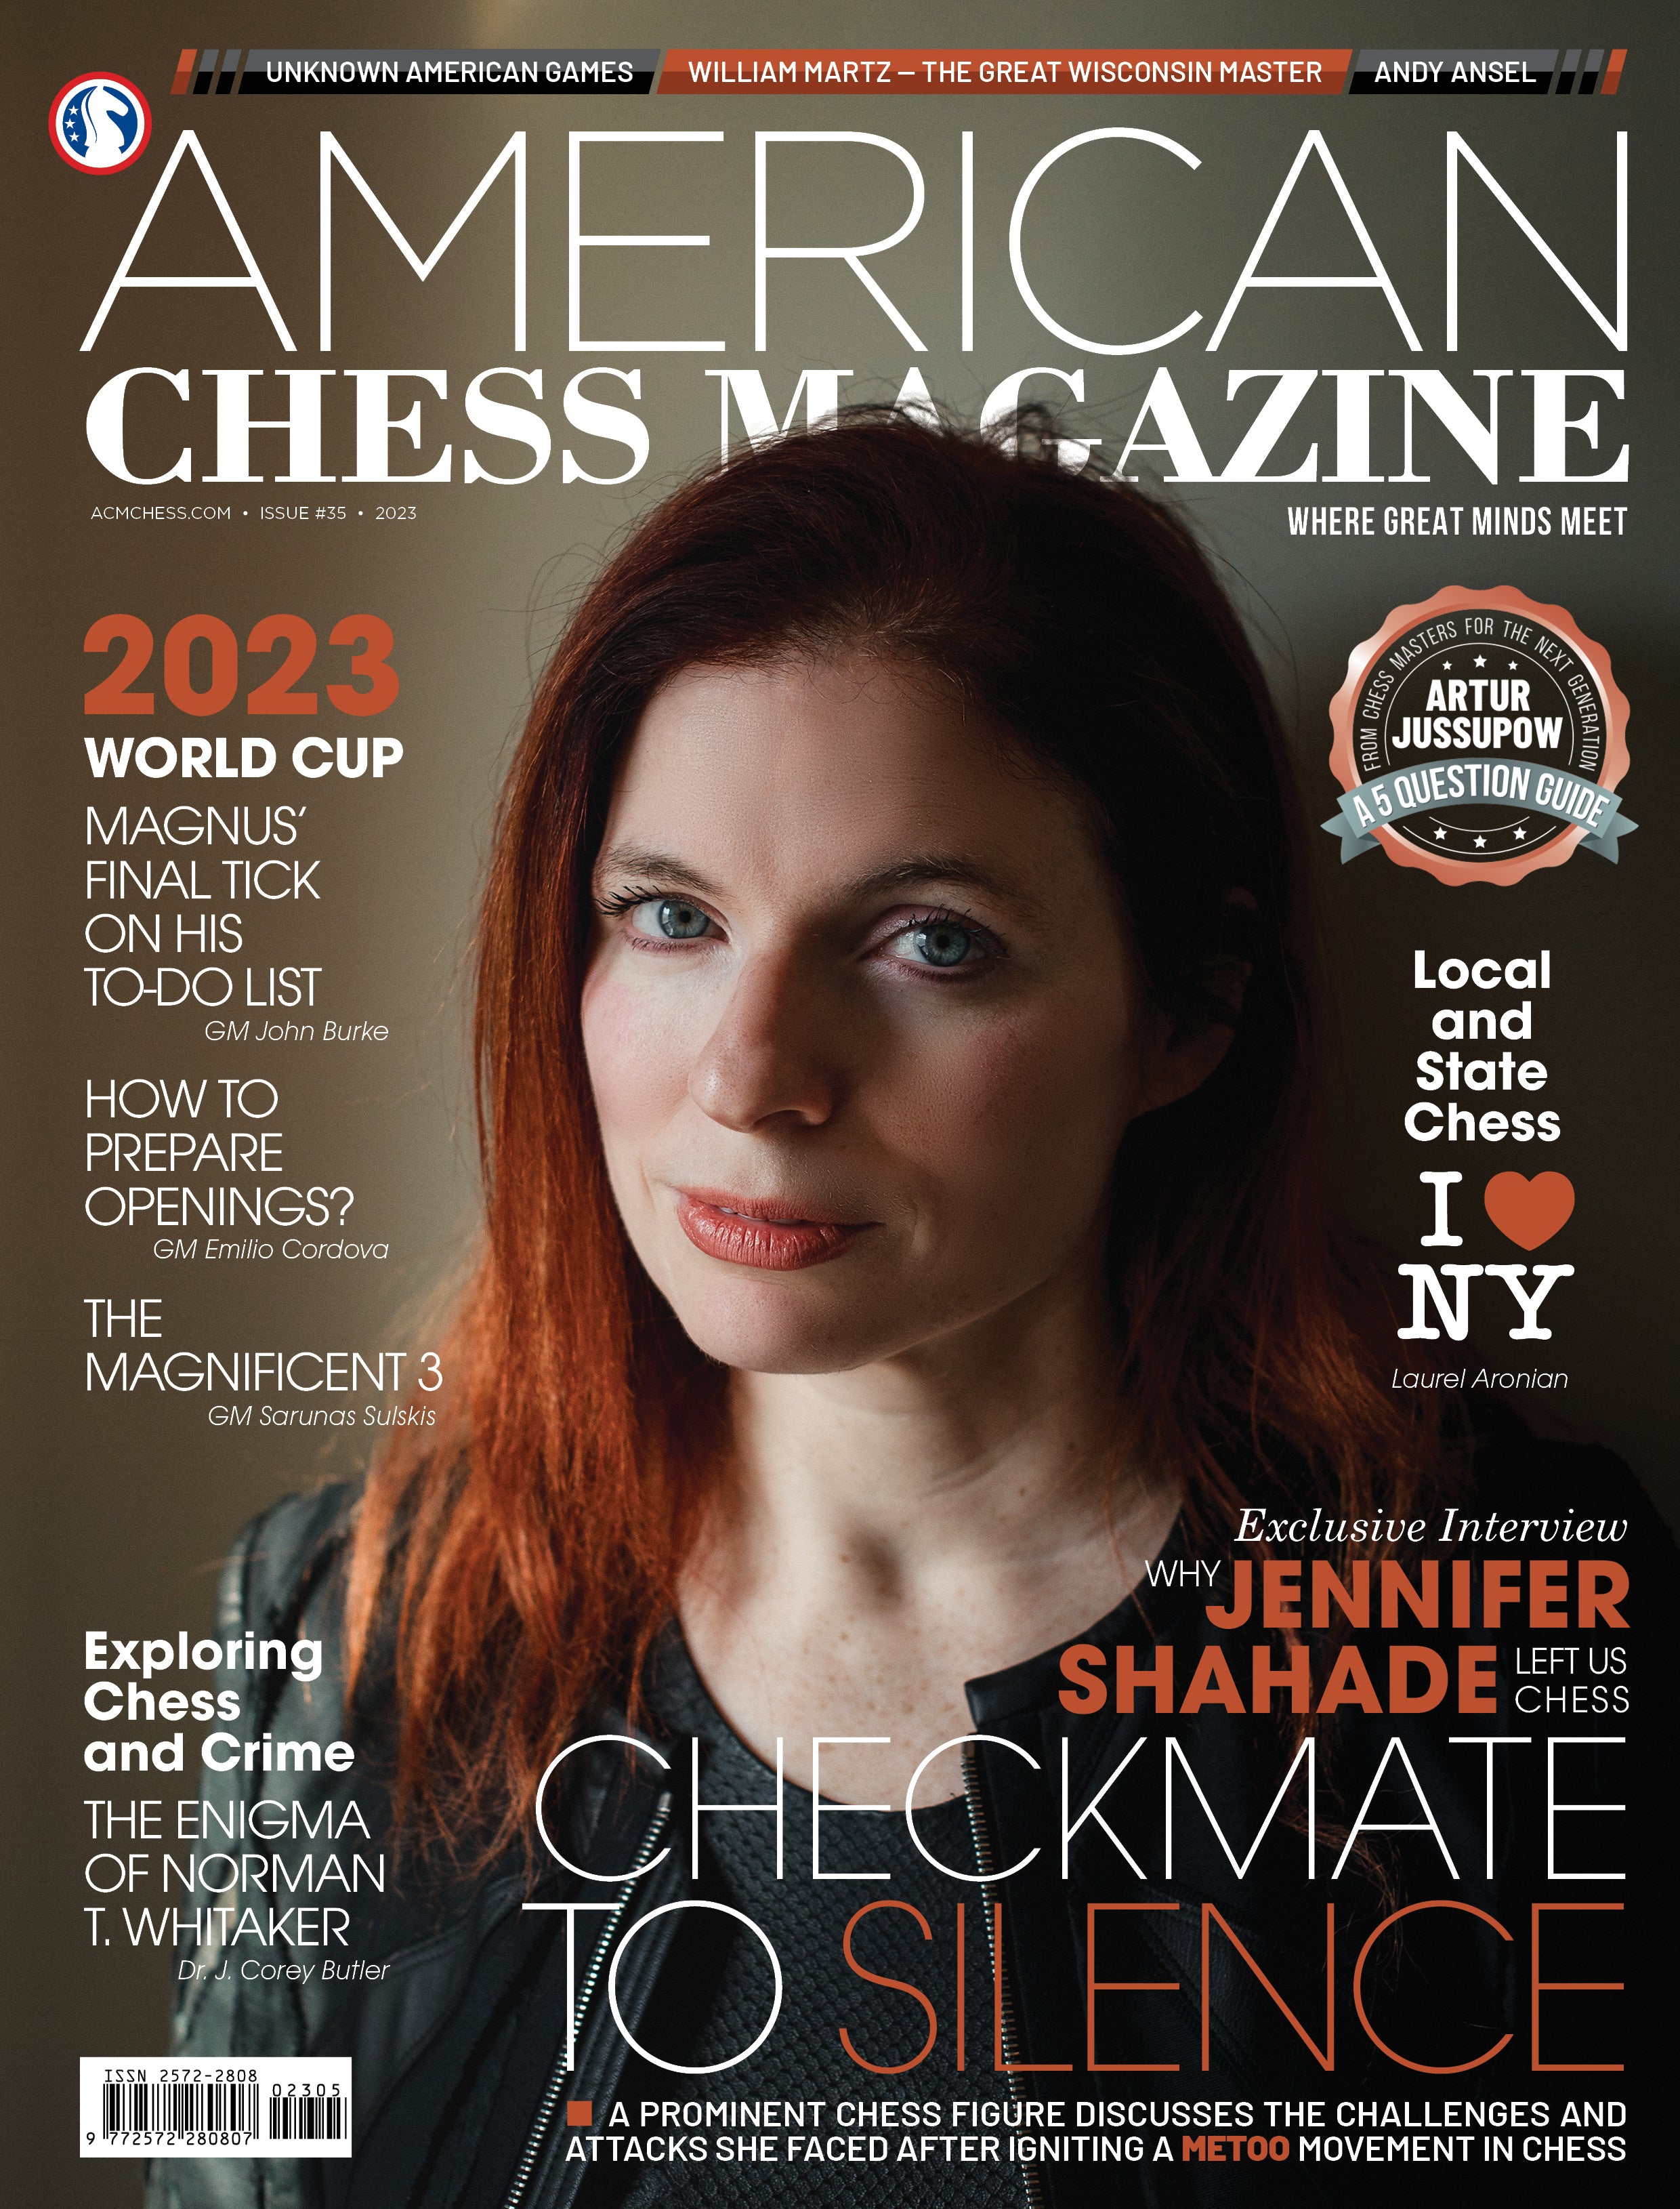 CLEARANCE - AMERICAN CHESS MAGAZINE Issue no. 29